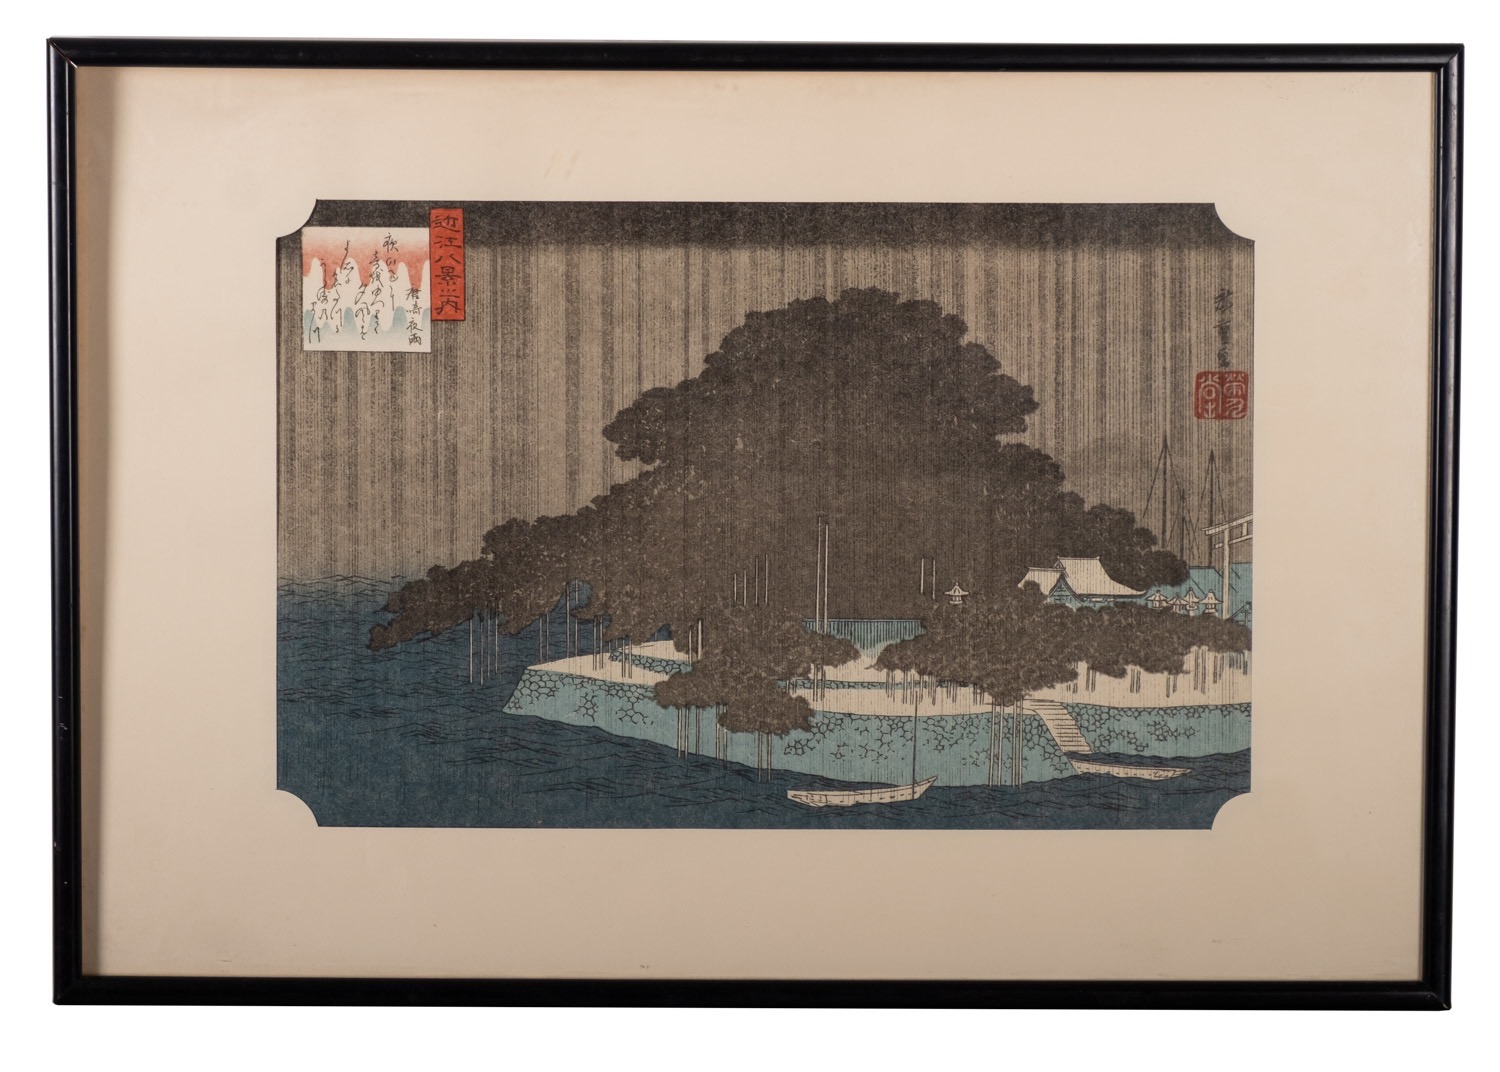 Utagawa Hiroshige, four facsimile wood blocks, two from the Fifty-three stations of the Tokaido', - Image 3 of 3